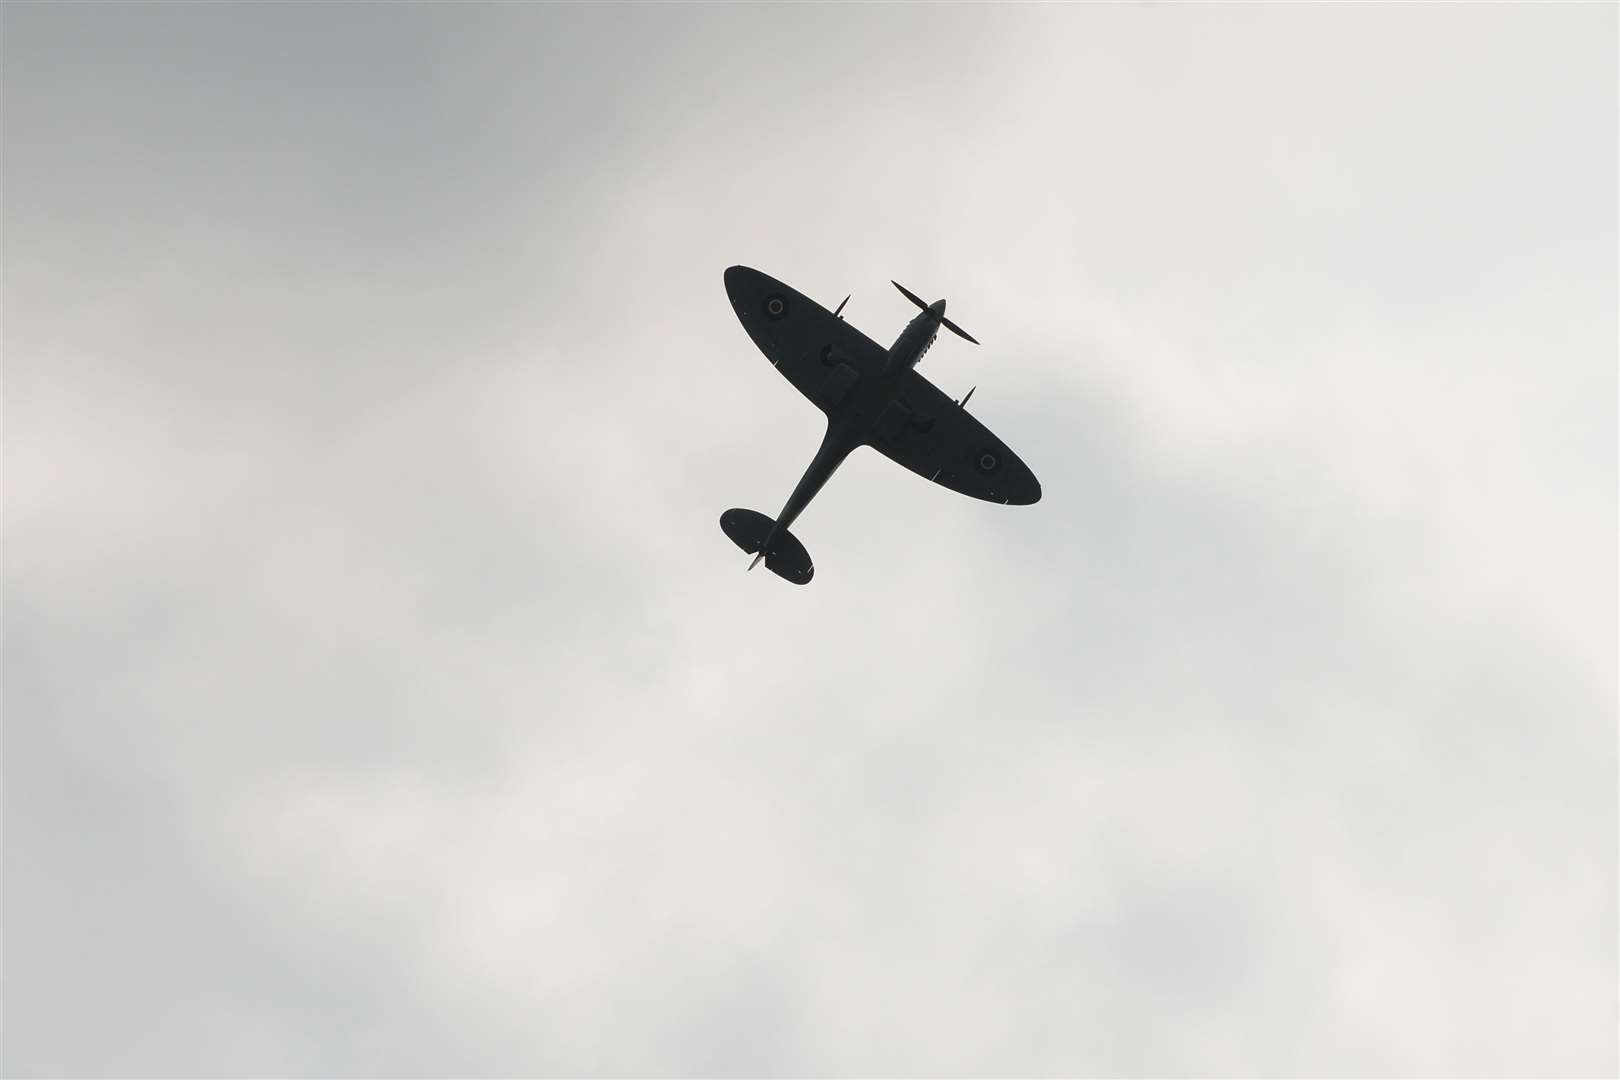 The Spitfire - the best loved plane of the Second World War